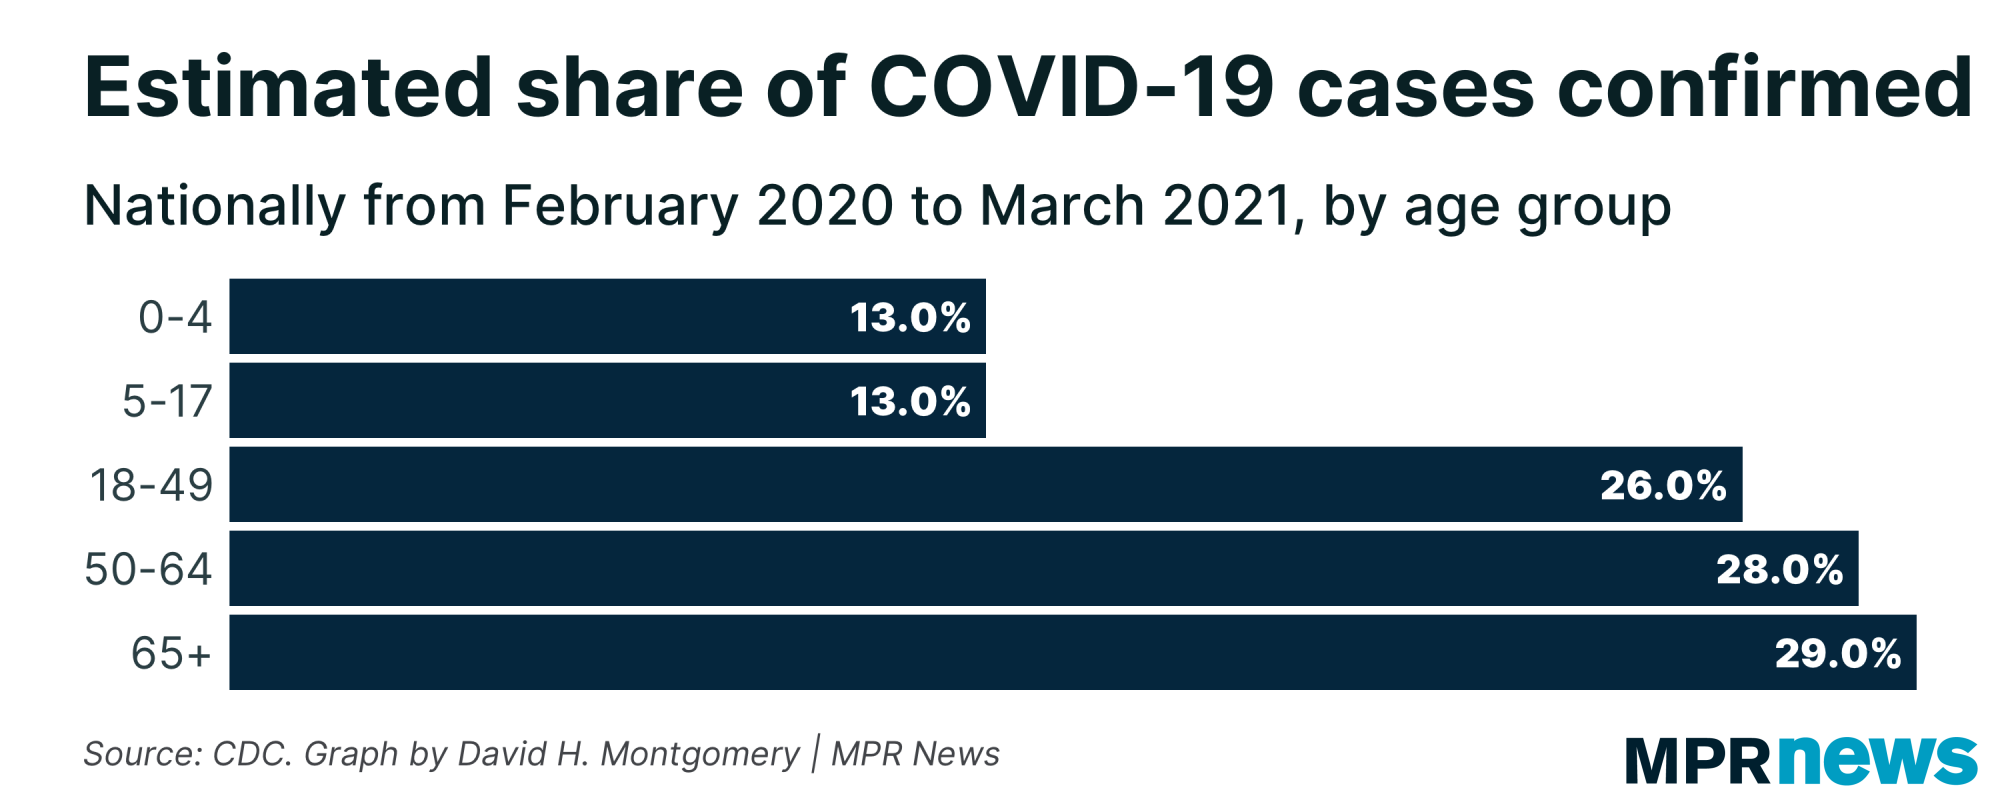 Graph of the estimated share of COVID-19 infections to be confirmed, by age